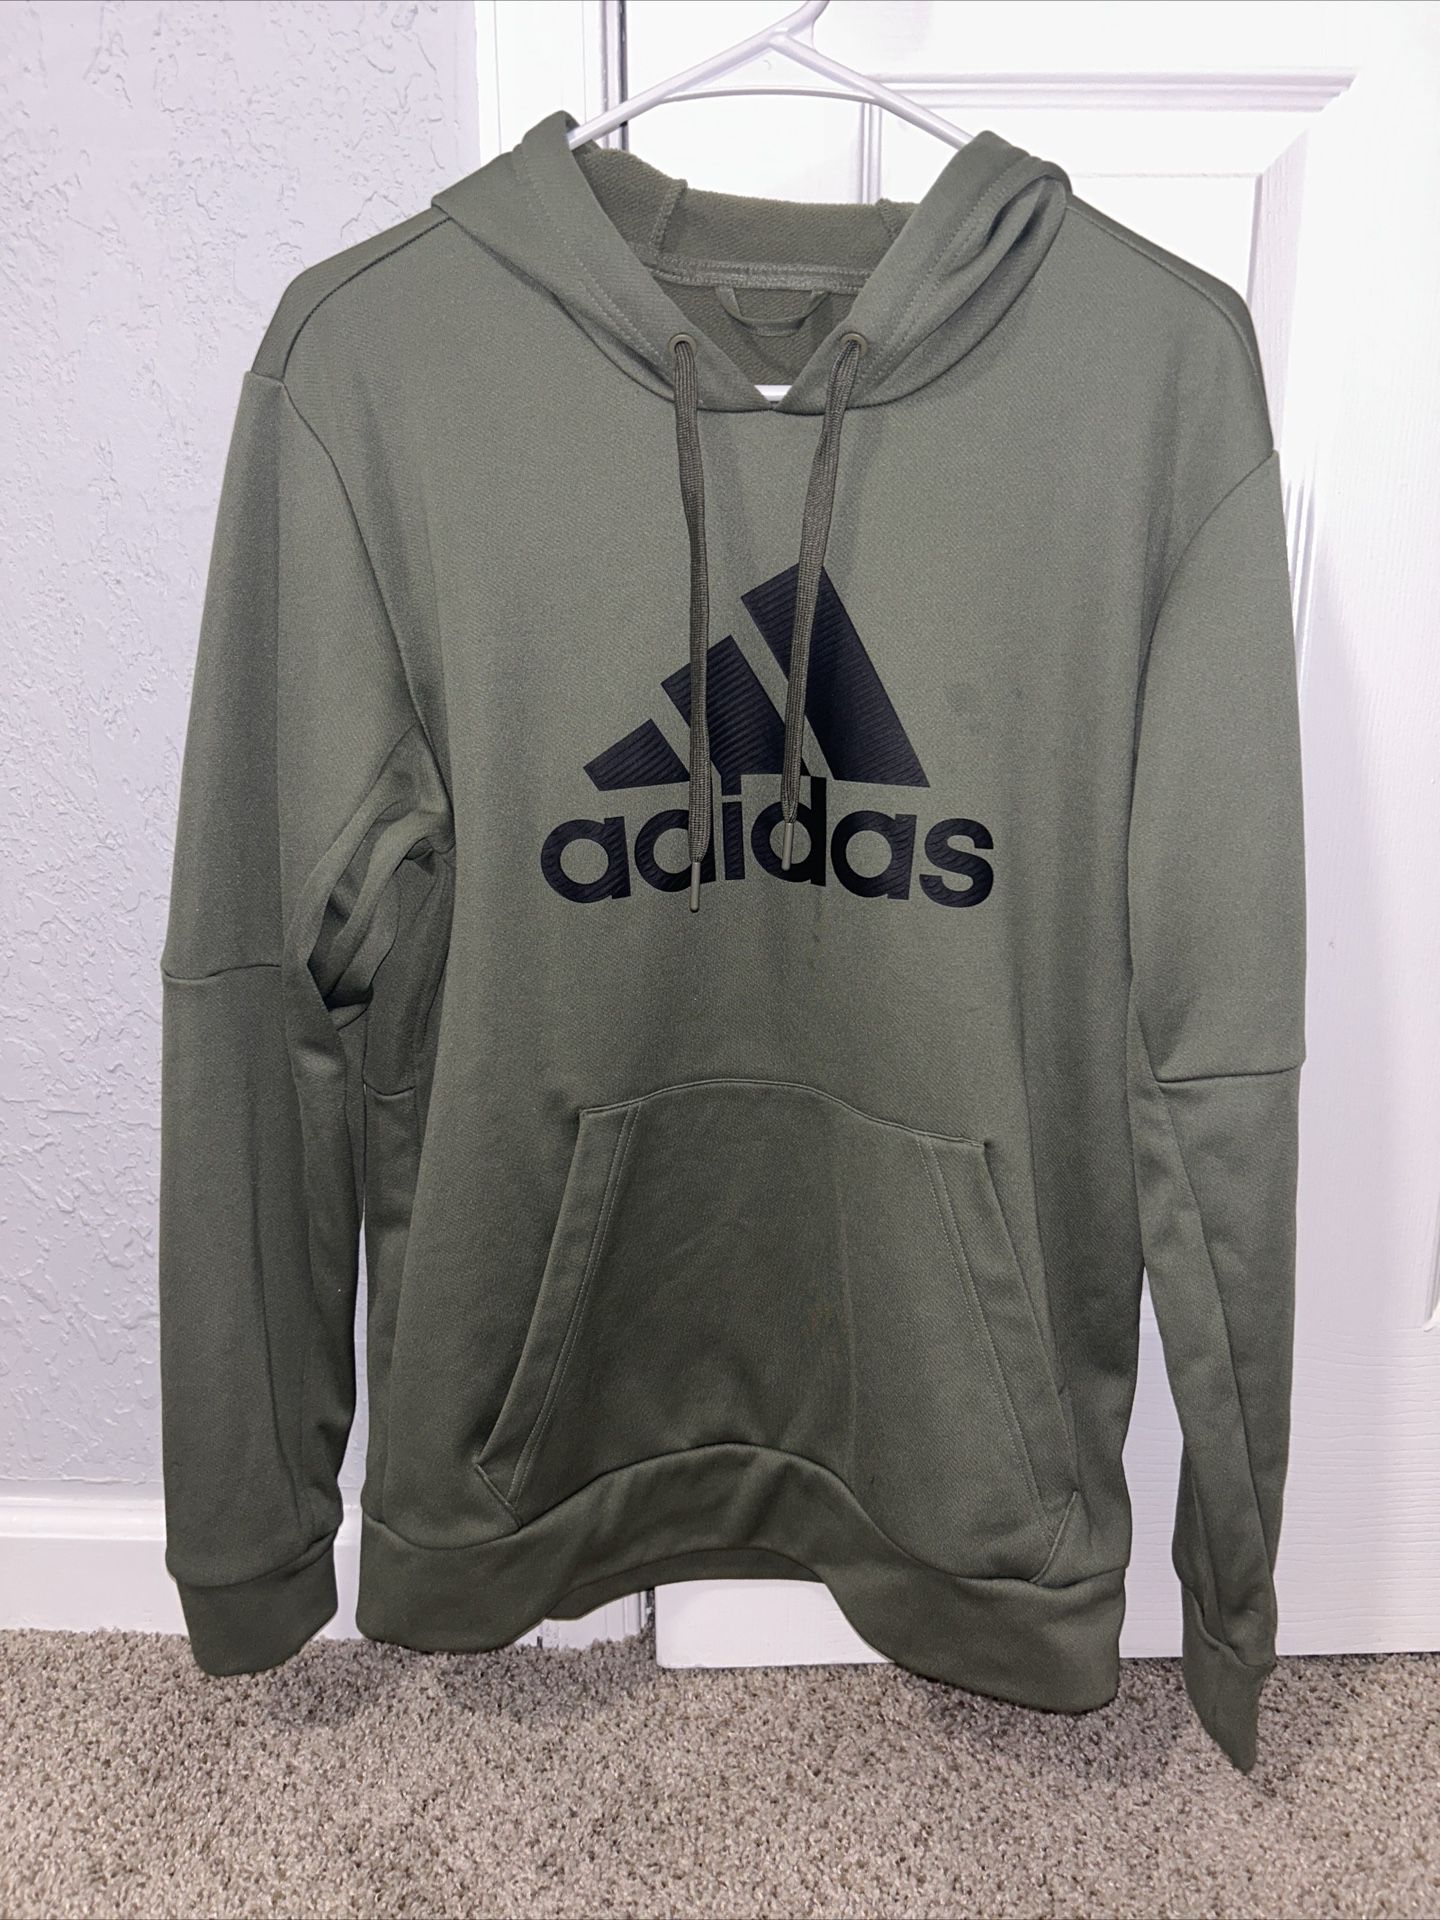 adidas Game and Go Pullover Men's Hoodie, Size Medium